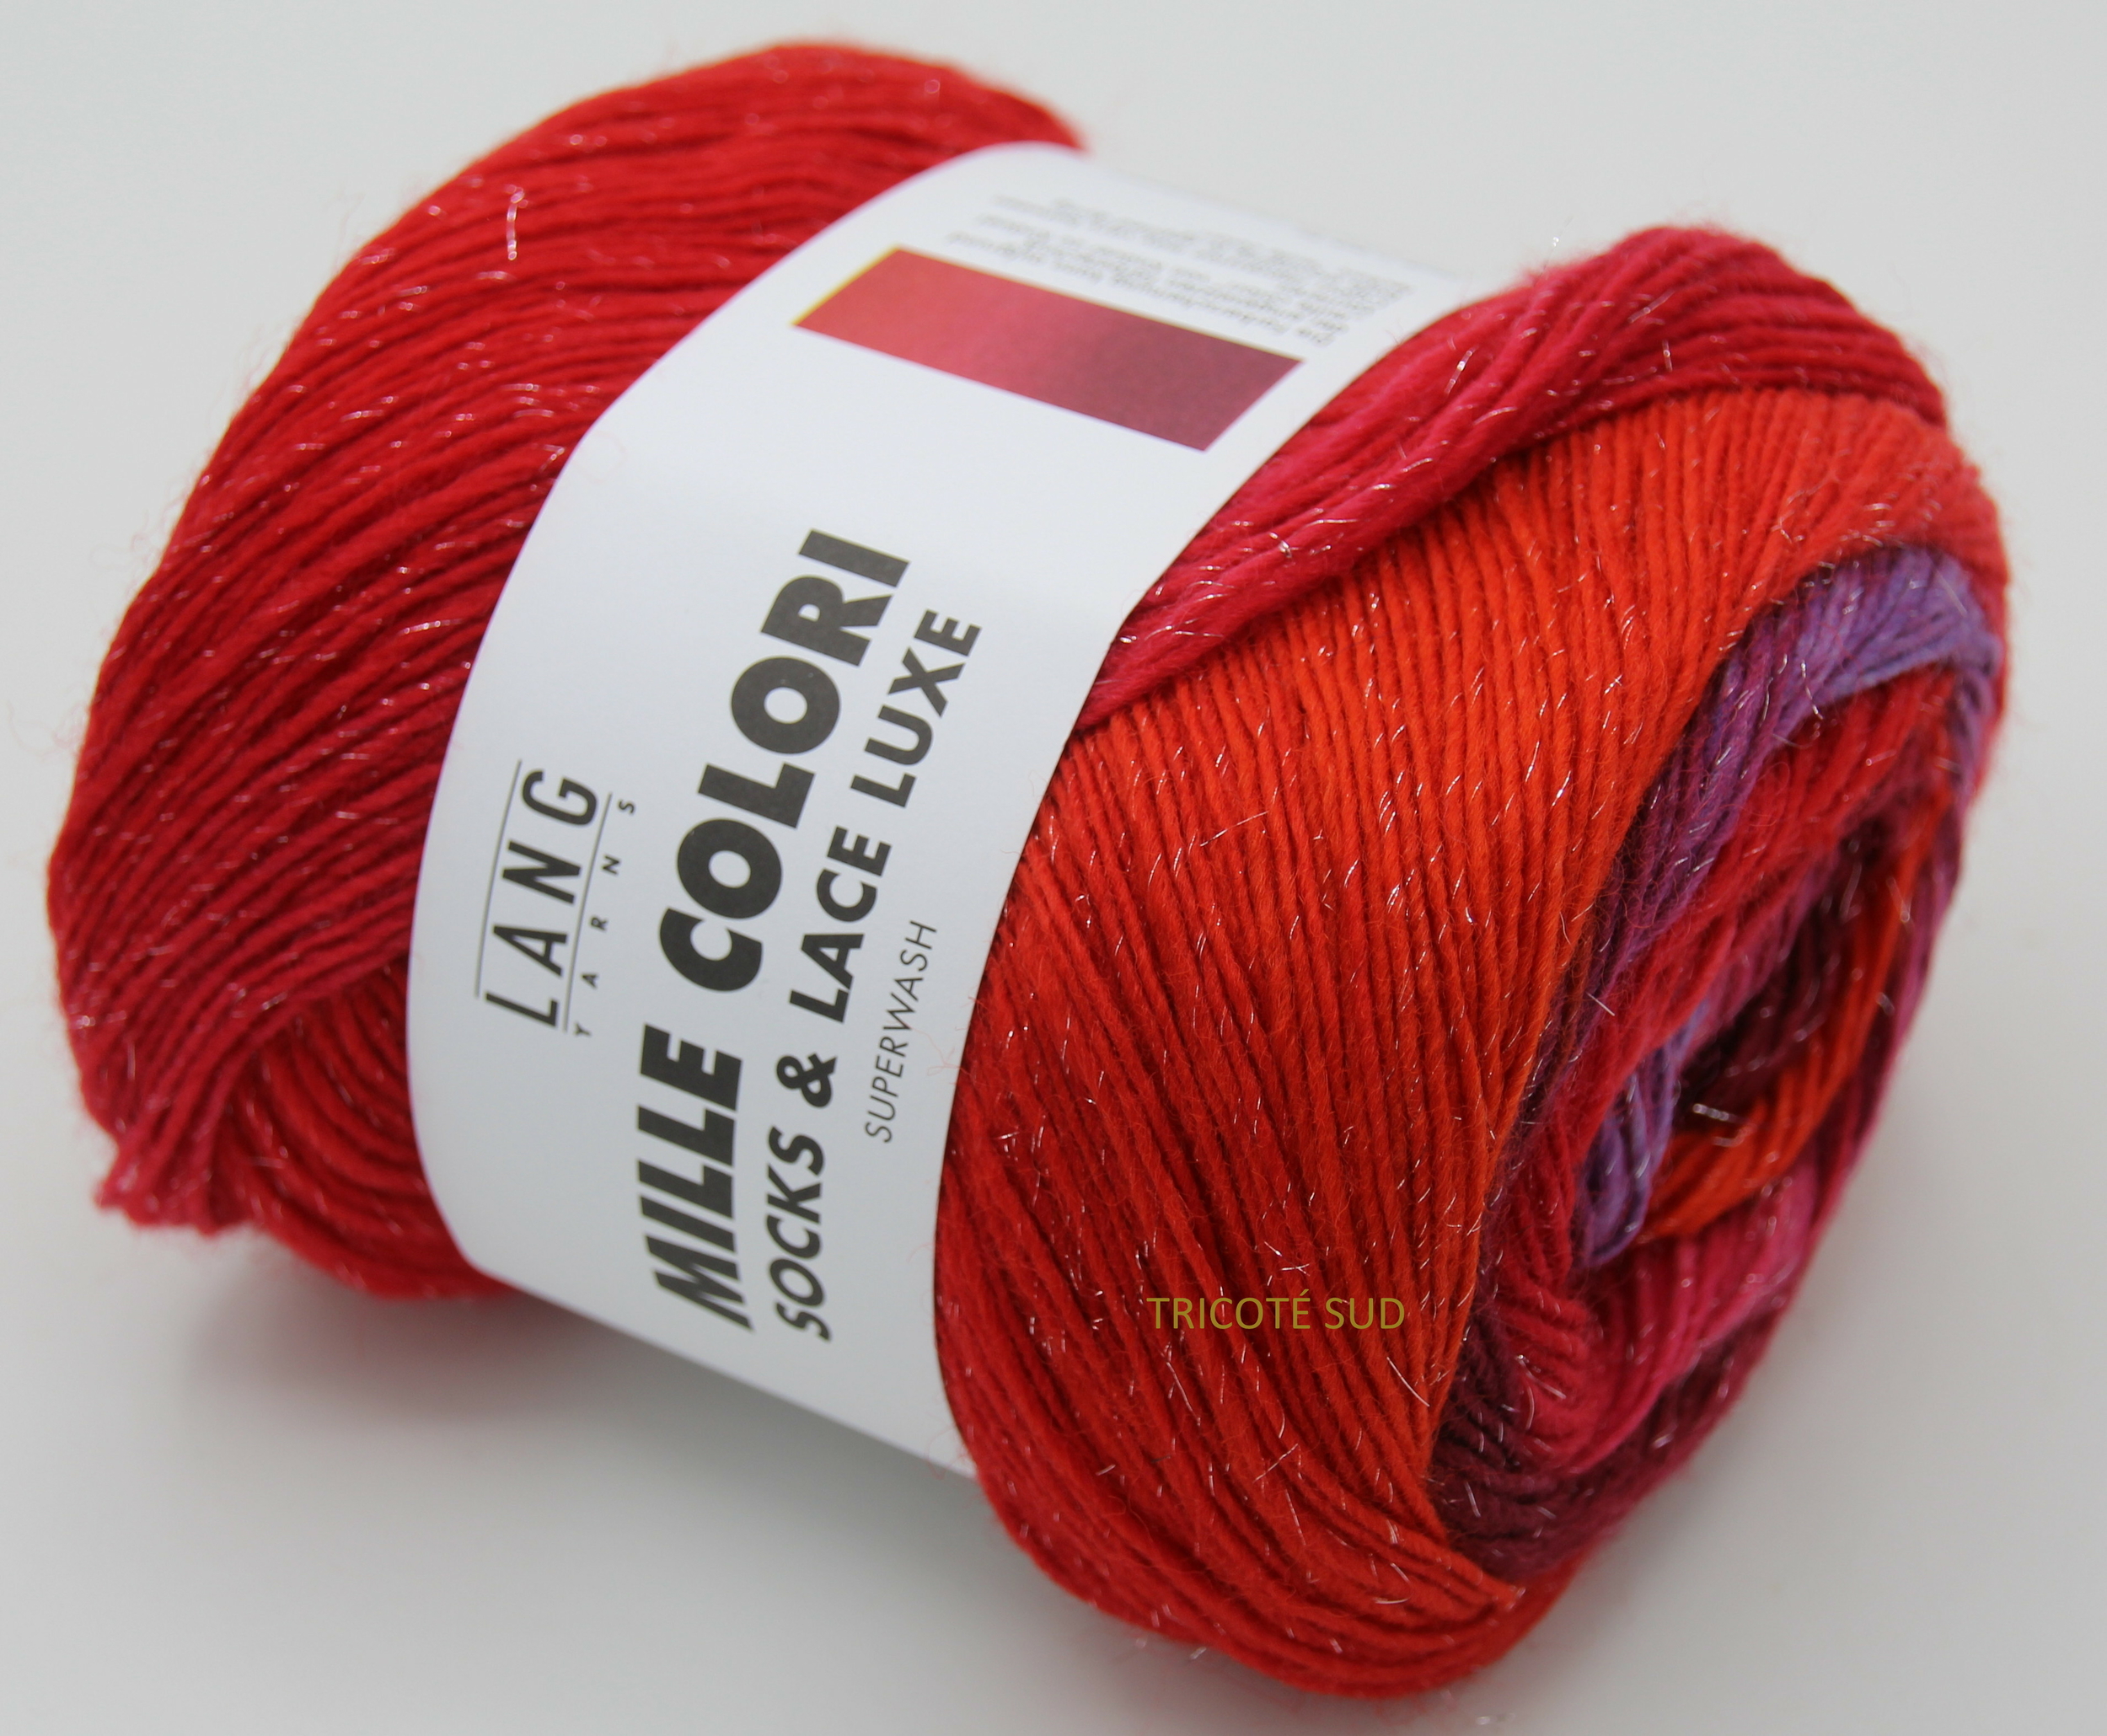 MILLE COLORI SOCKS AND LACE LUXE COLORIS 217 (2)